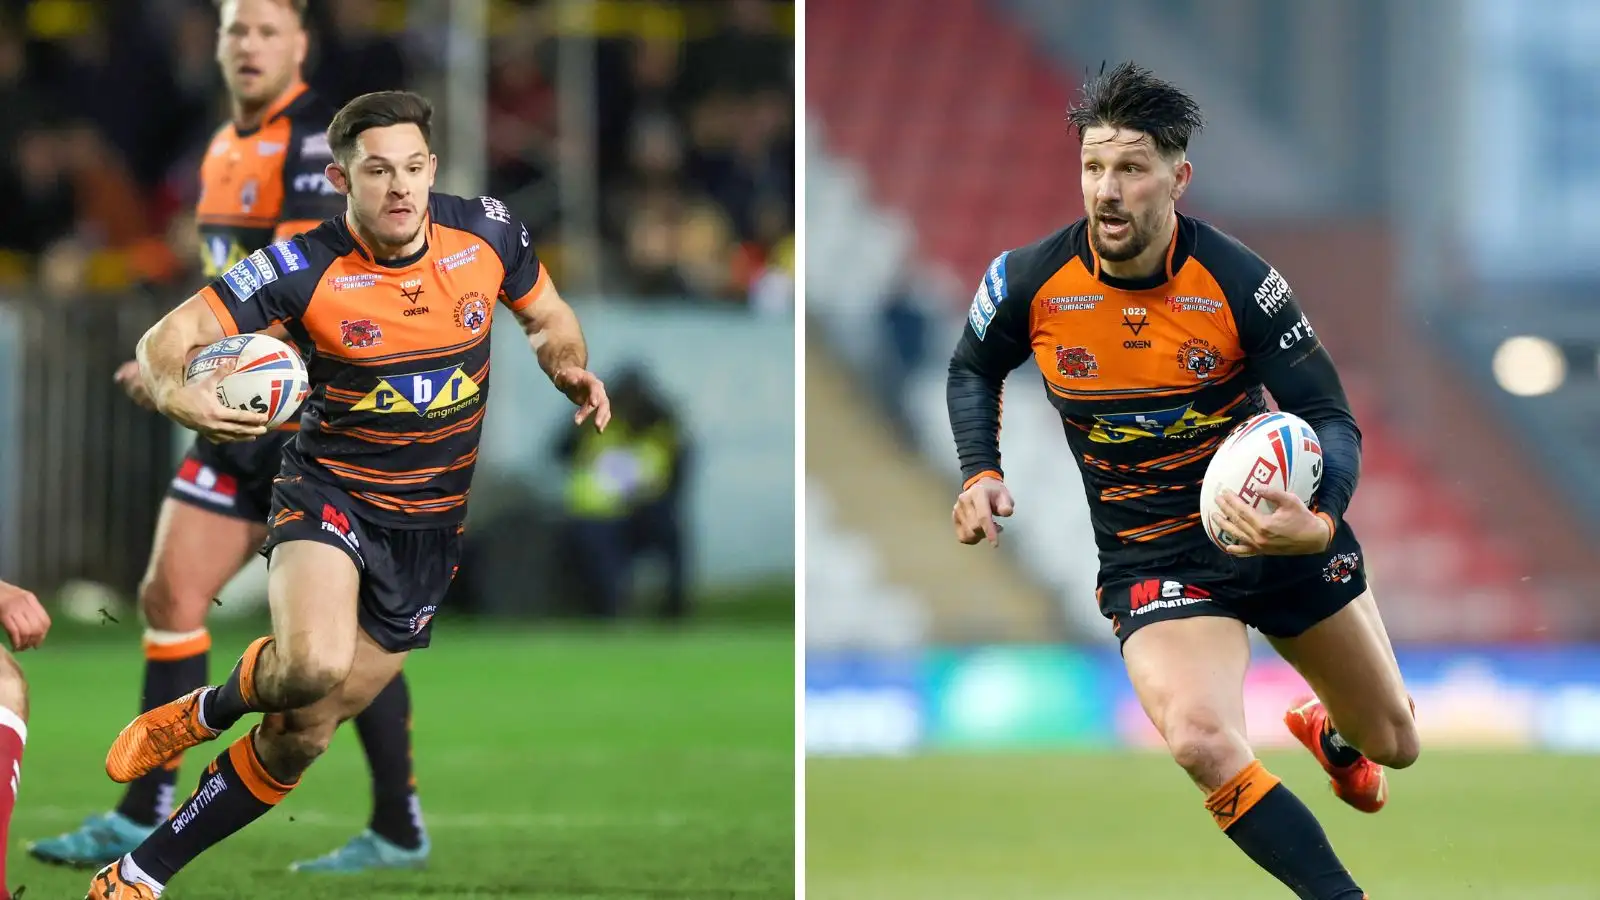 Castleford coach provides the latest on Niall Evalds and Gareth Widdop